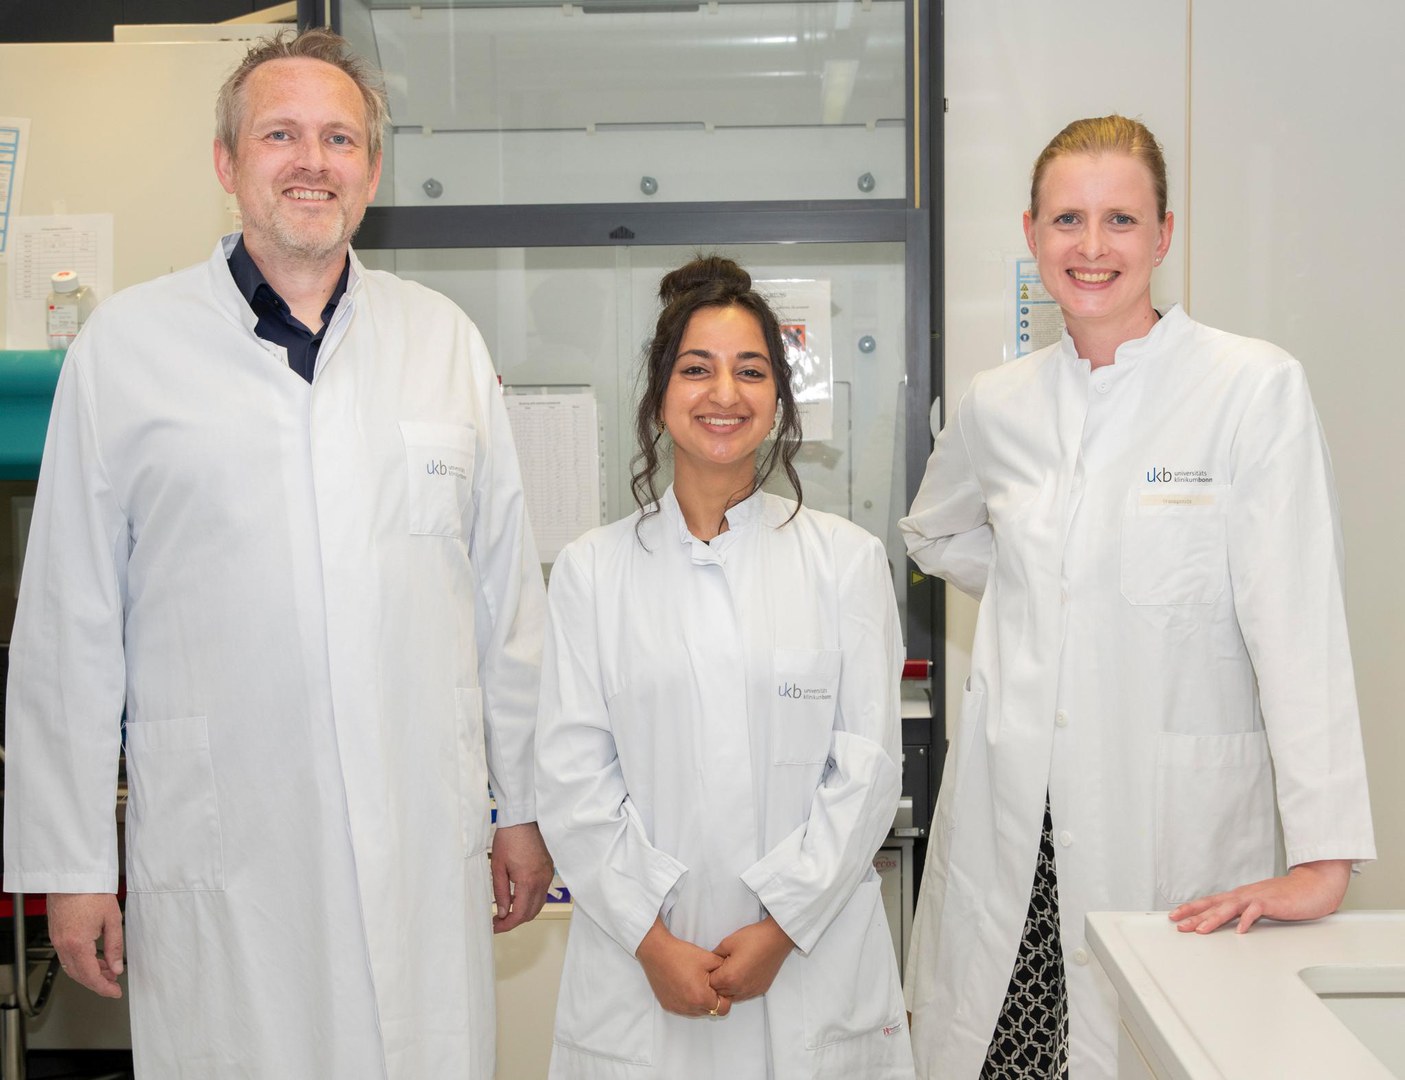 Bonn researchers establish efficient, cost-effective method for generating endothelial cells from stem cells for cardiovascular research: (from left) Prof. Volker Busskamp, Kritika Sharma and first author Dr. Sarah Rieck.